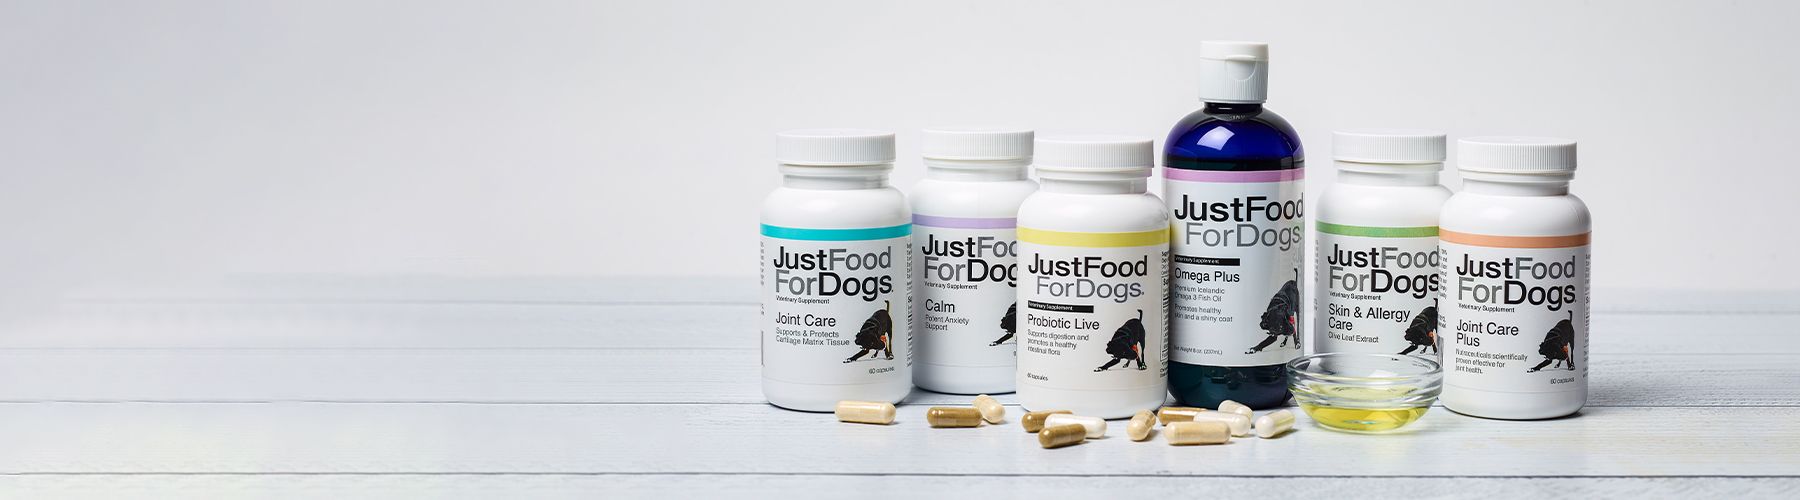 Vitamin supplements for dogs banner tablet